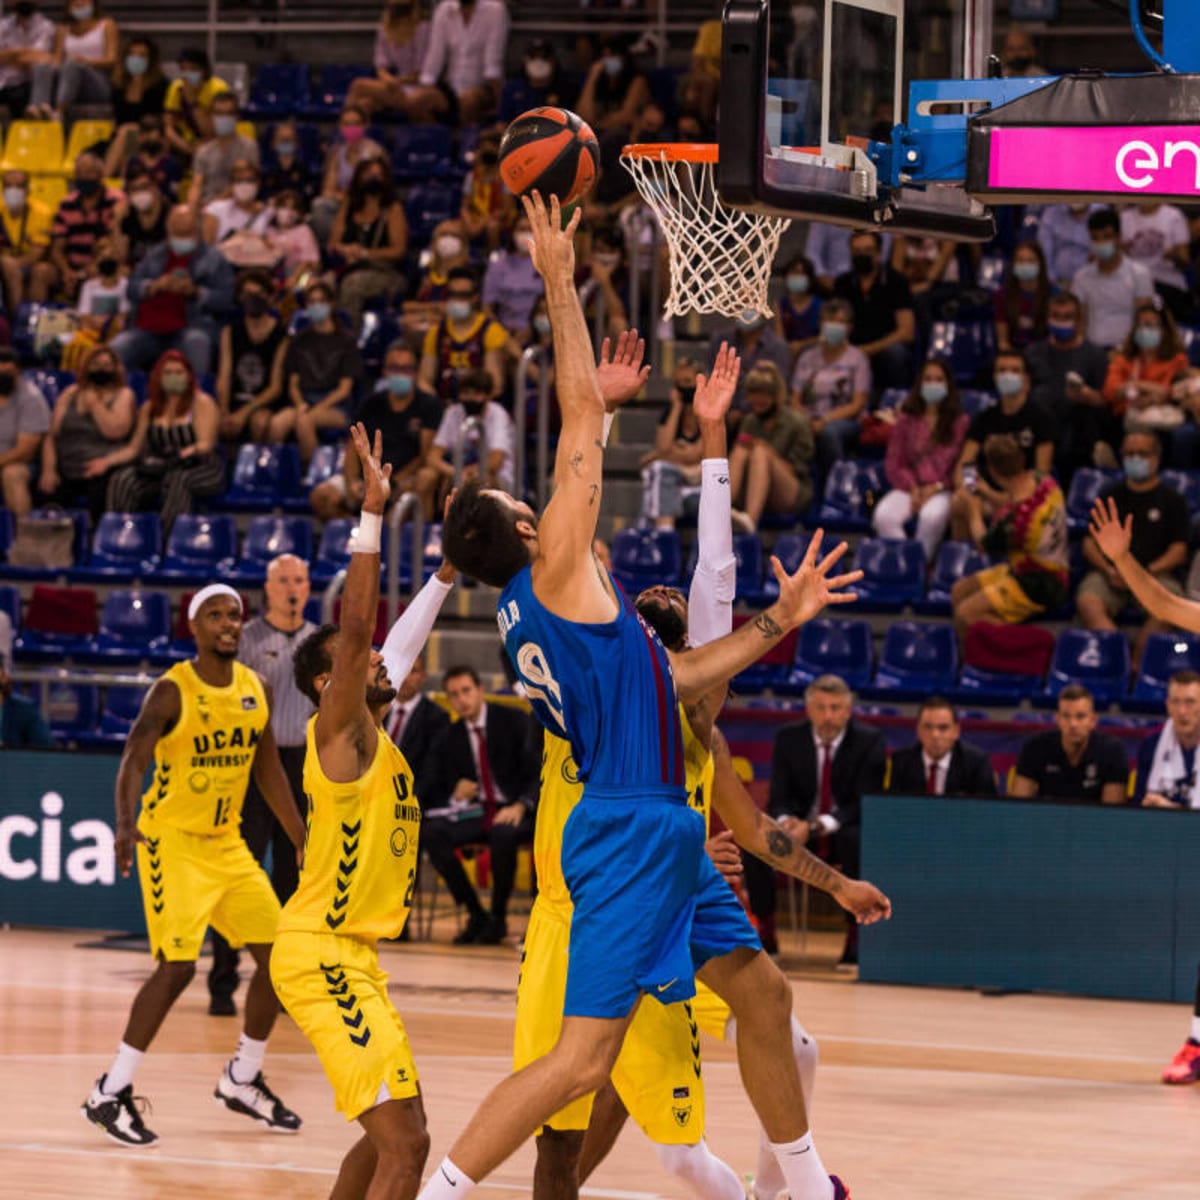 Liga ACB Basketball stream Watch online, TV channel - How to Watch and Stream Major League and College Sports